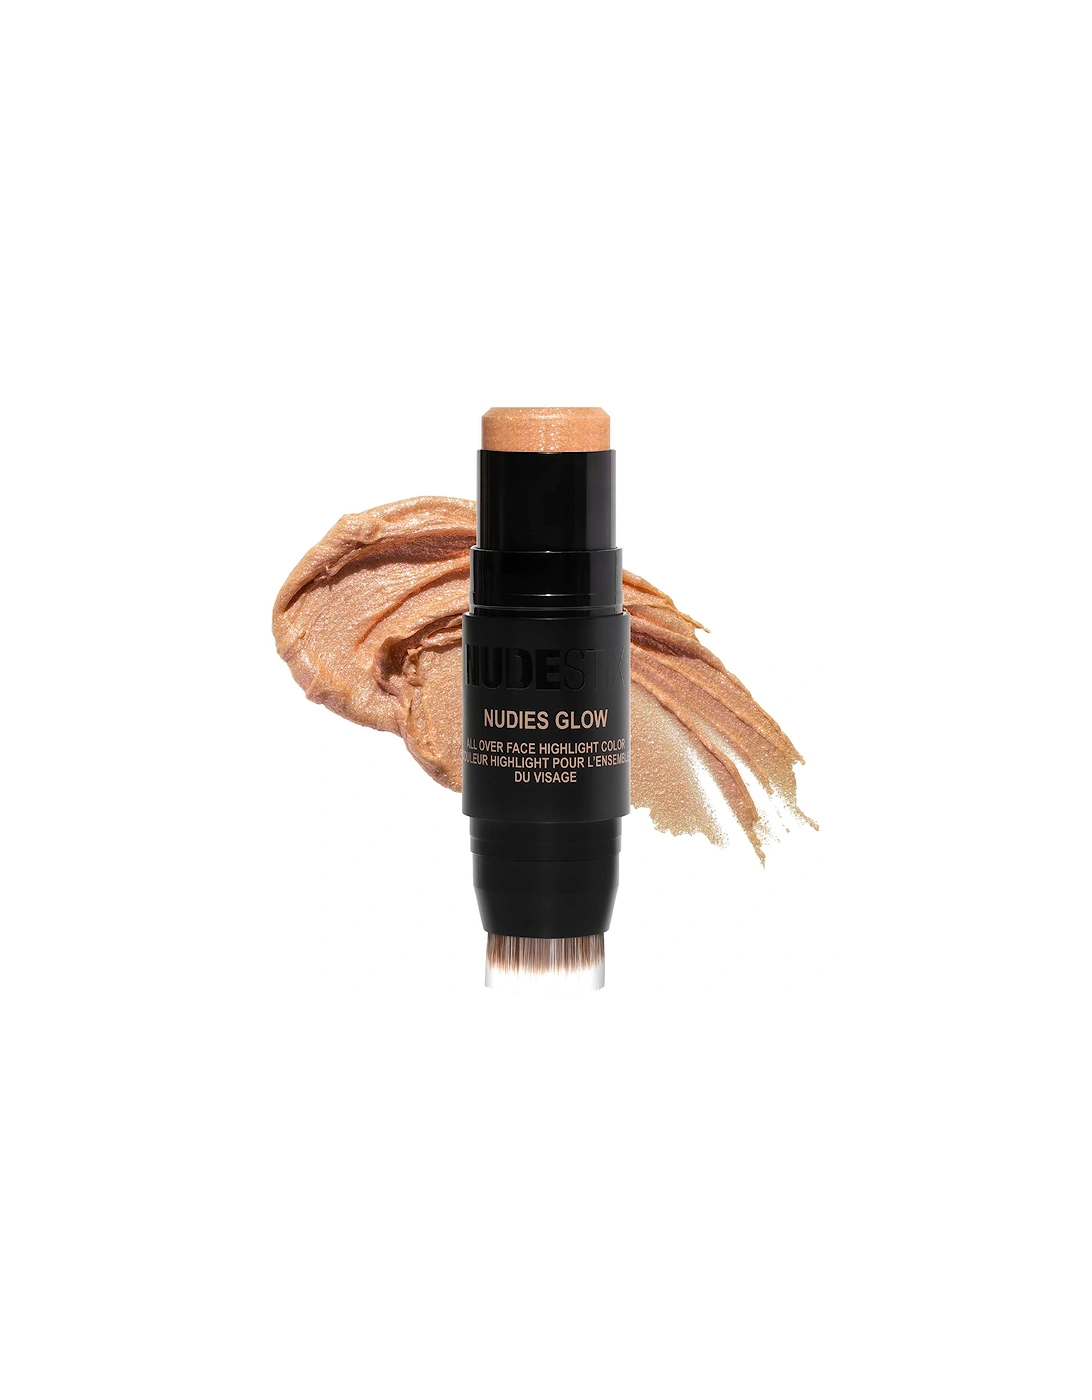 Nudies Glow All Over Face Highlight - Euphorix 8g, 2 of 1